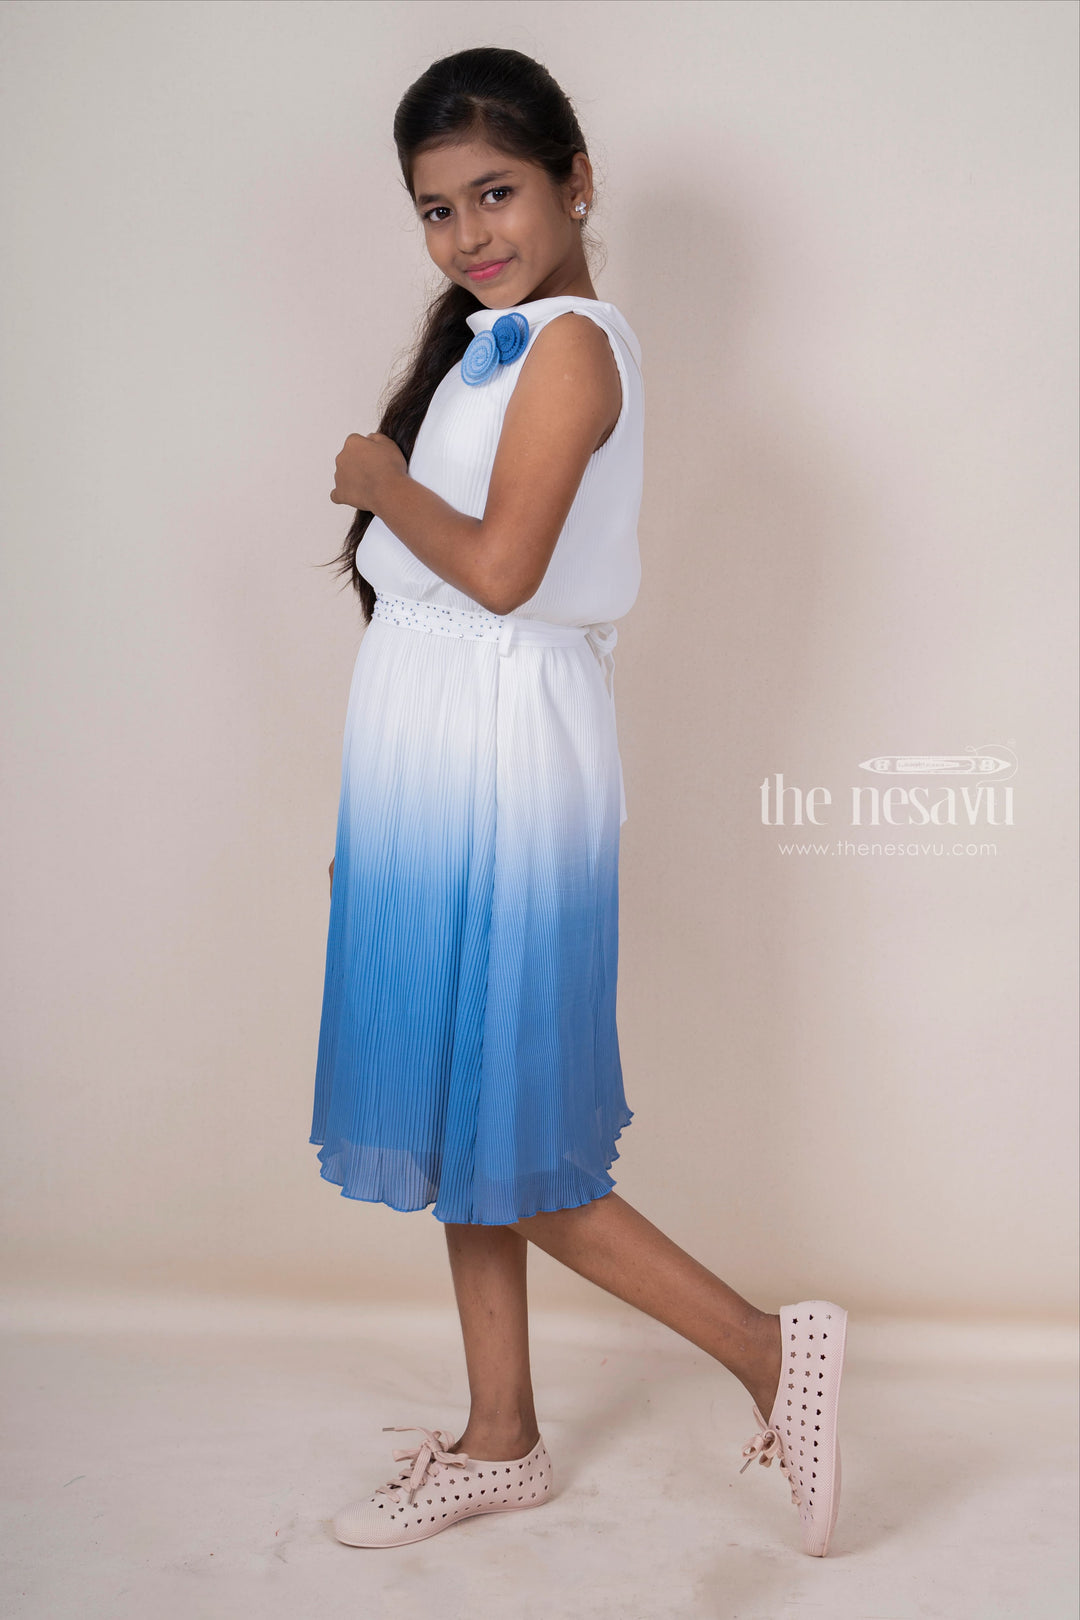 The Nesavu Frocks & Dresses Blue High Neck Semi Crushed Crepe Shaded Party Gown With Embellishments psr silks Nesavu